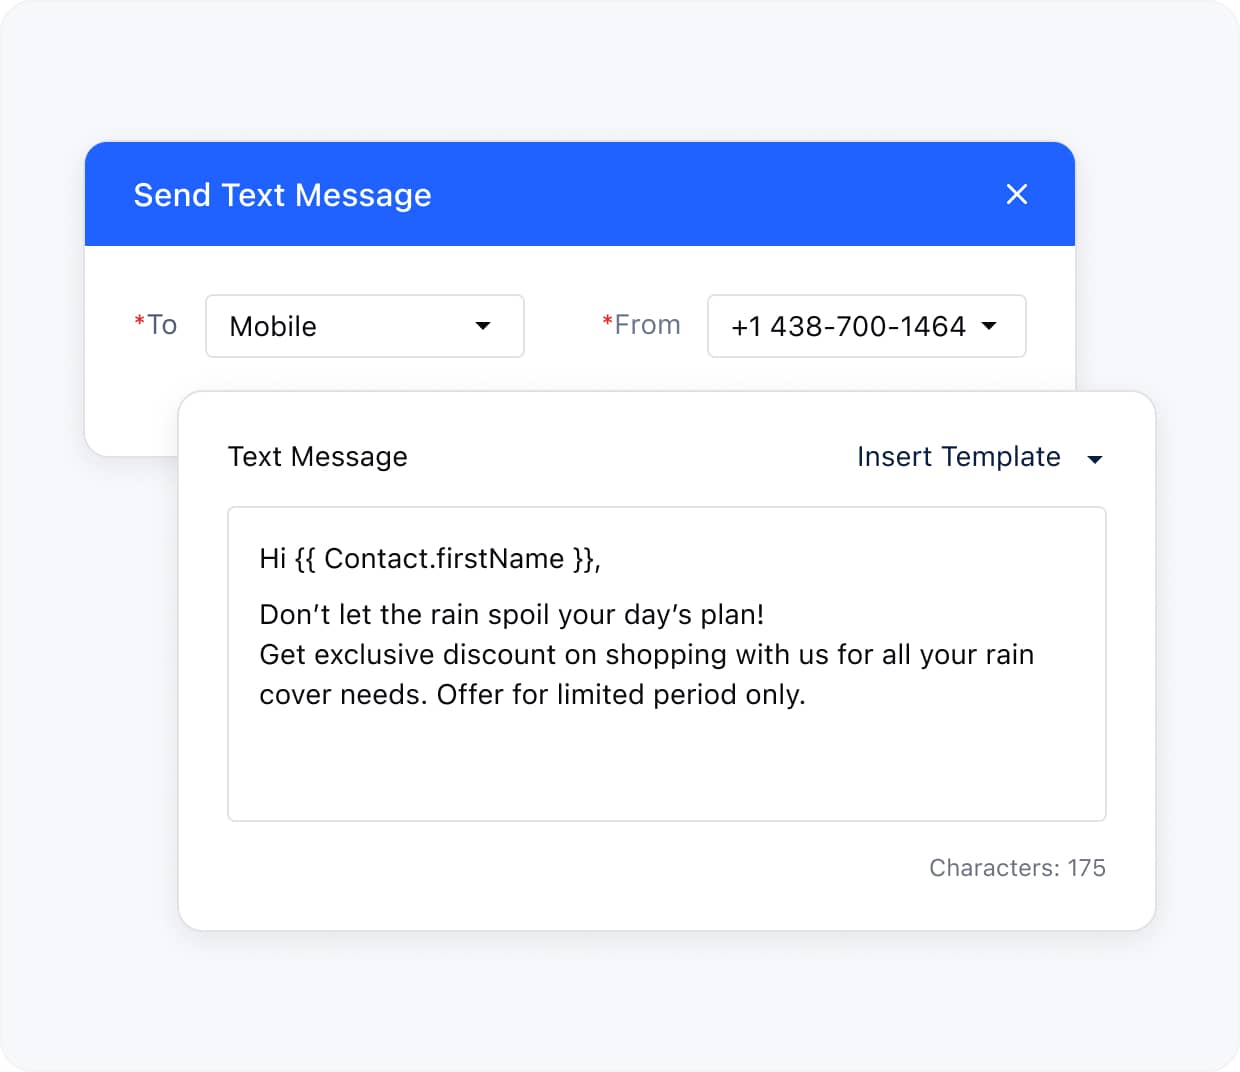 Send personalized texts to all contacts with a single click